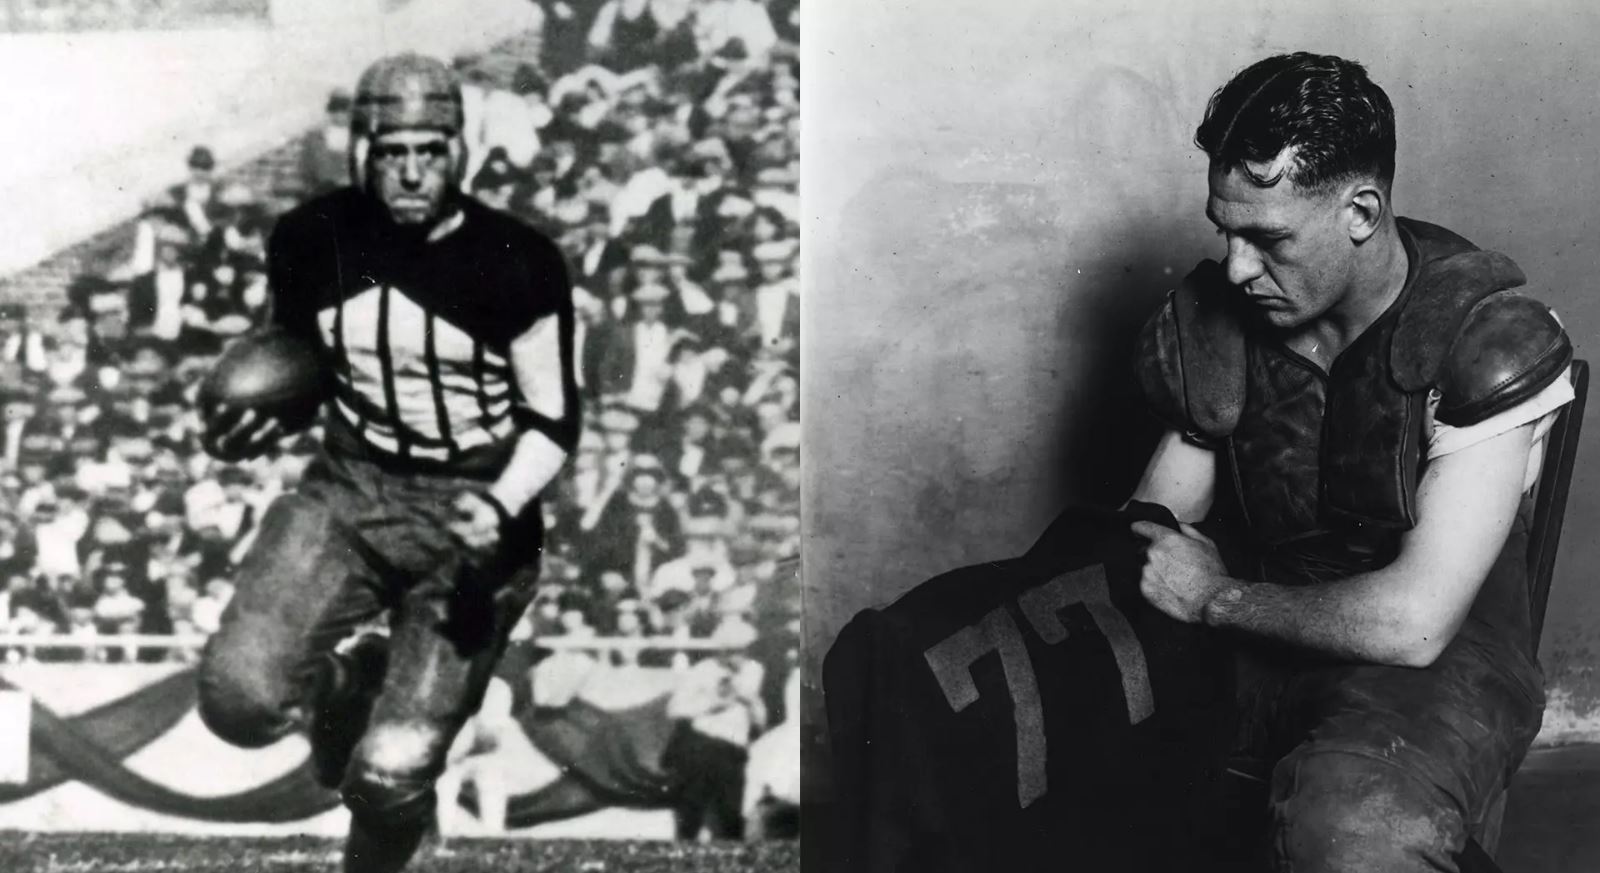 side-by-side images of Grange running with the football and sitting, wearing pads